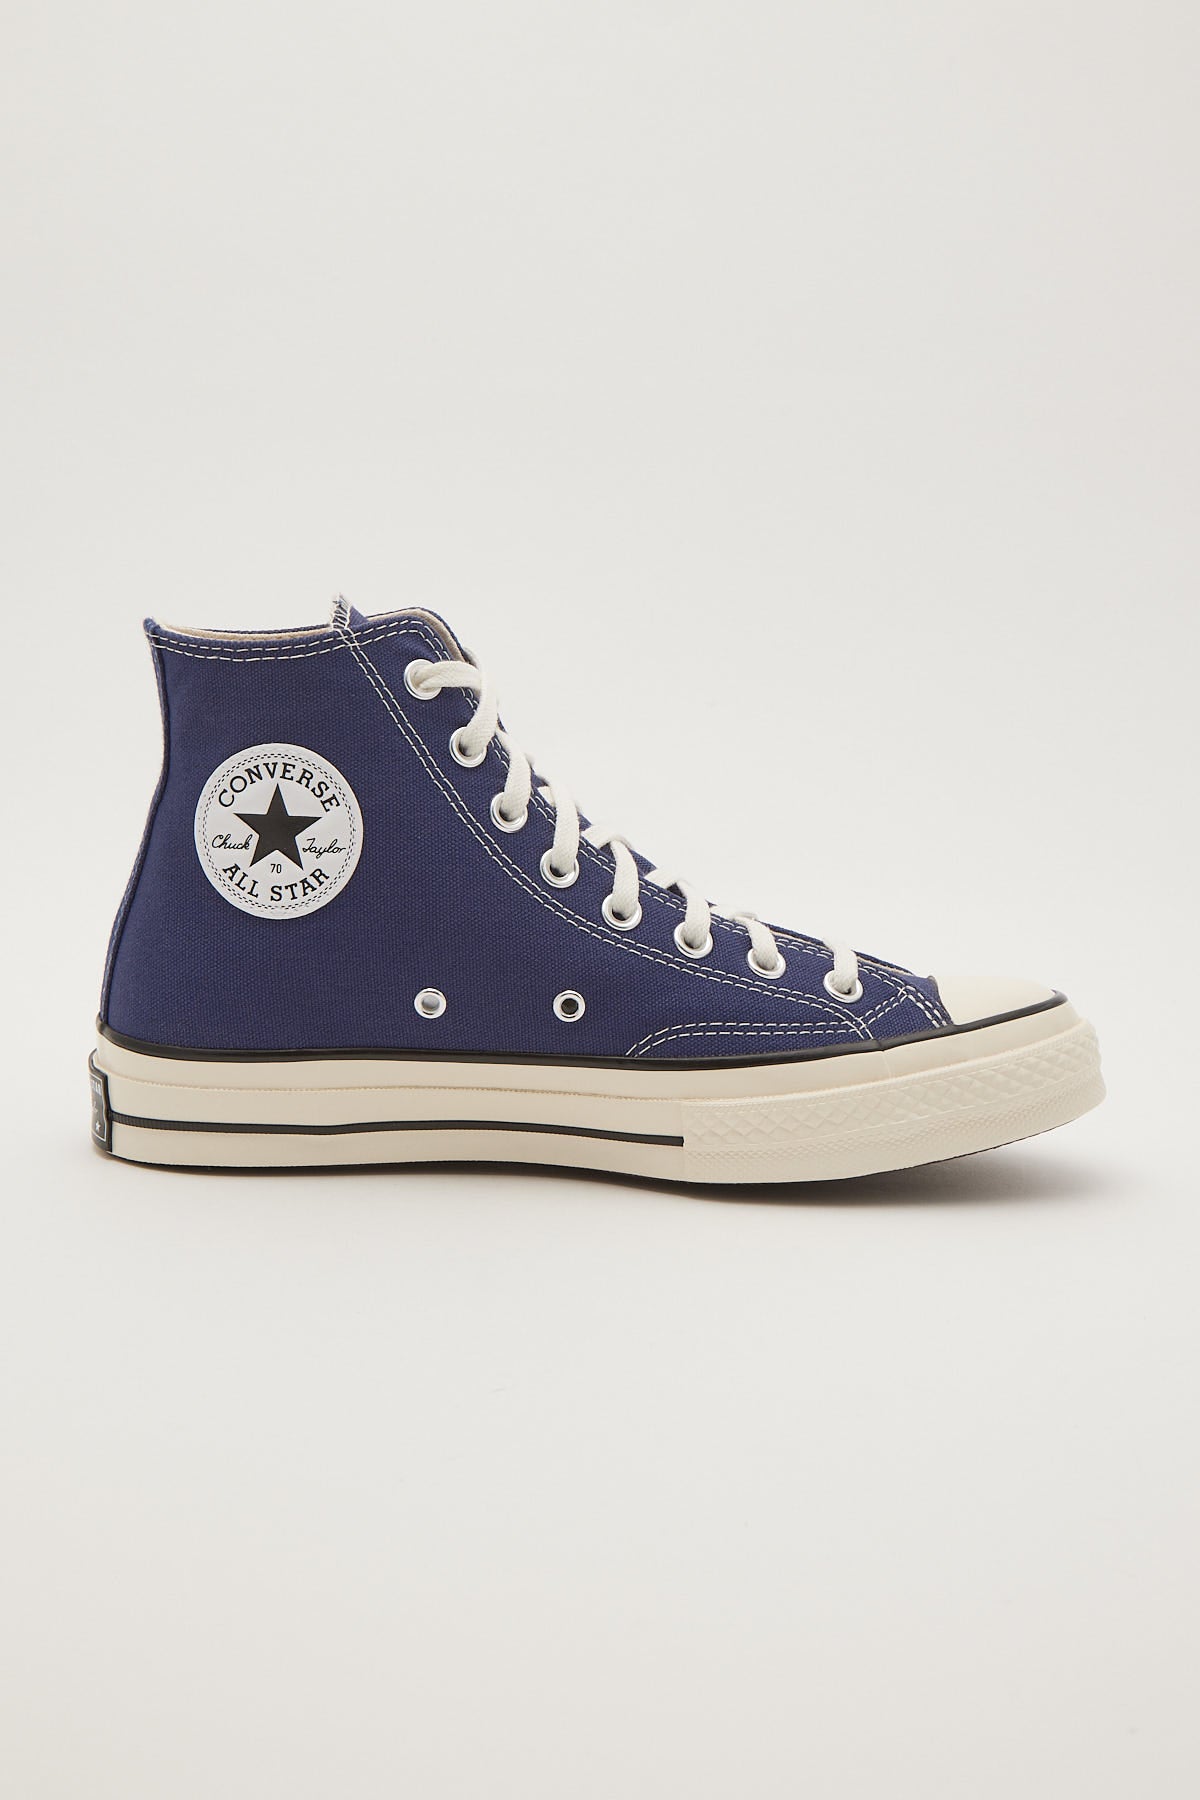 Converse Chuck 70s Unchatered Waters – Universal Store